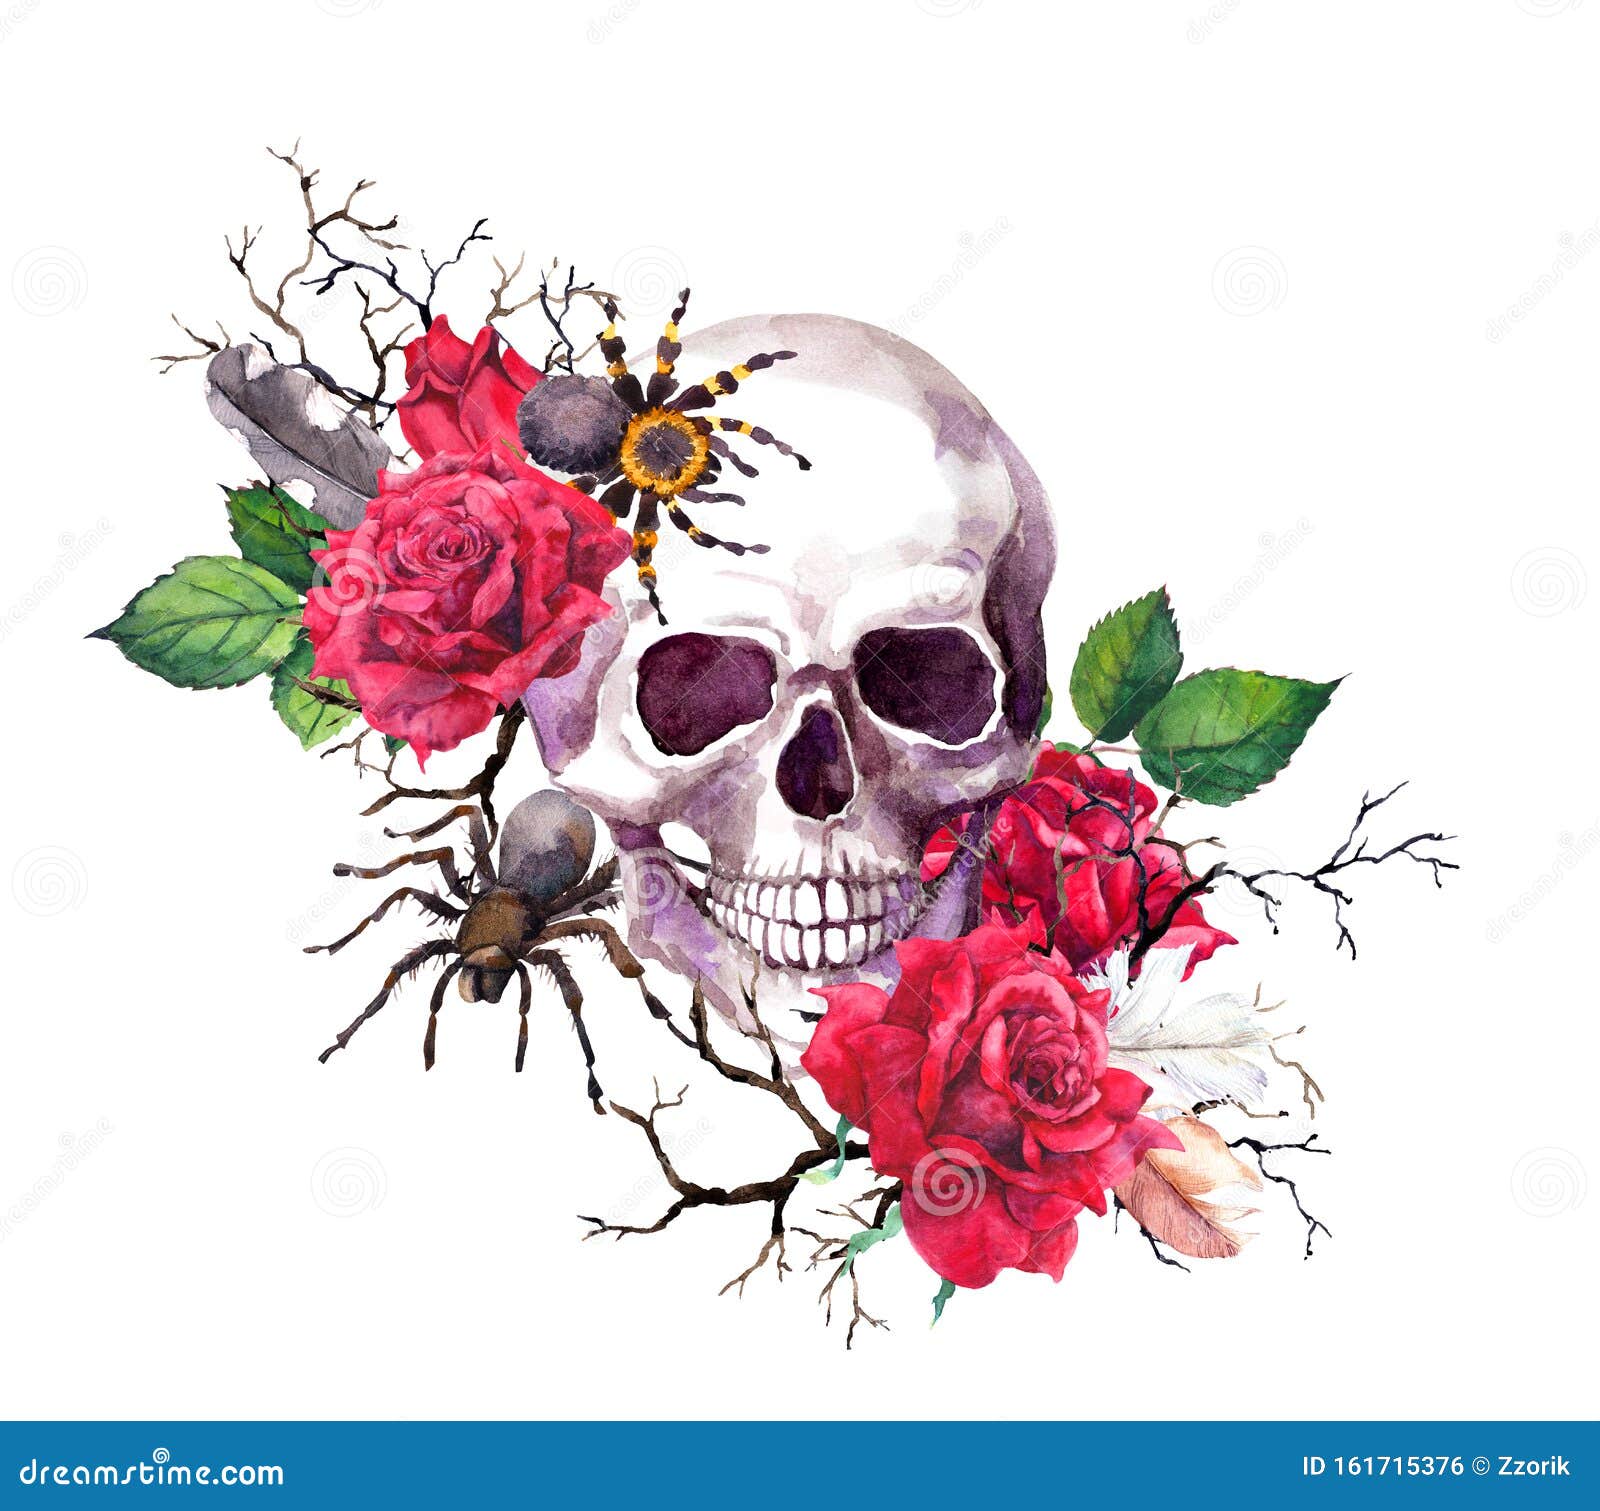 Gothic Picture Poster Art Framed Print Human Skull with Colourful Flowers 